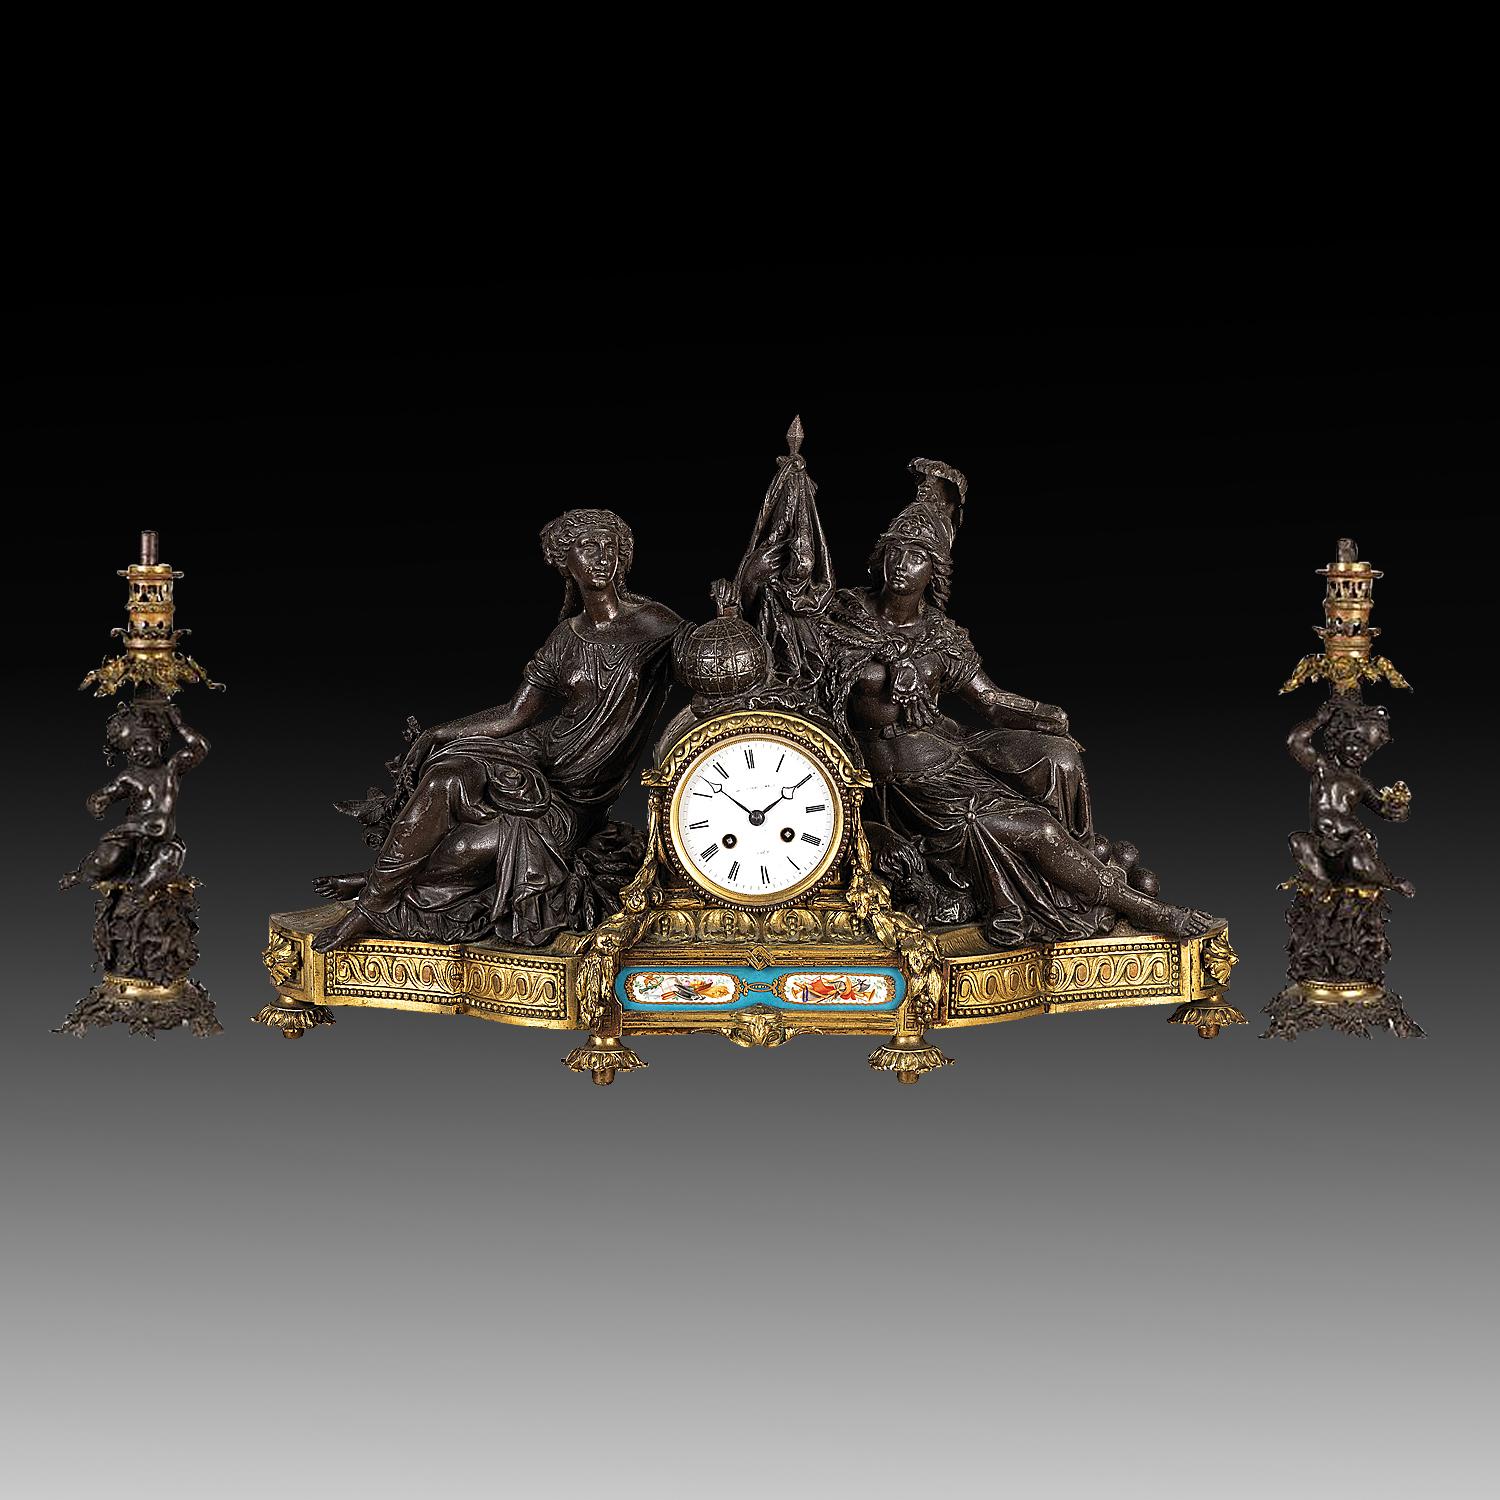 An Exceptional Very Fine French Mid-19th Century Triptych Gilt Bronze Sculptured Figural Empire Mantle Clock with Two Cherub Oil Lamps

This is an extraordinary and exceptional piece of finely sculptured gilt bronze and antimony three-piece